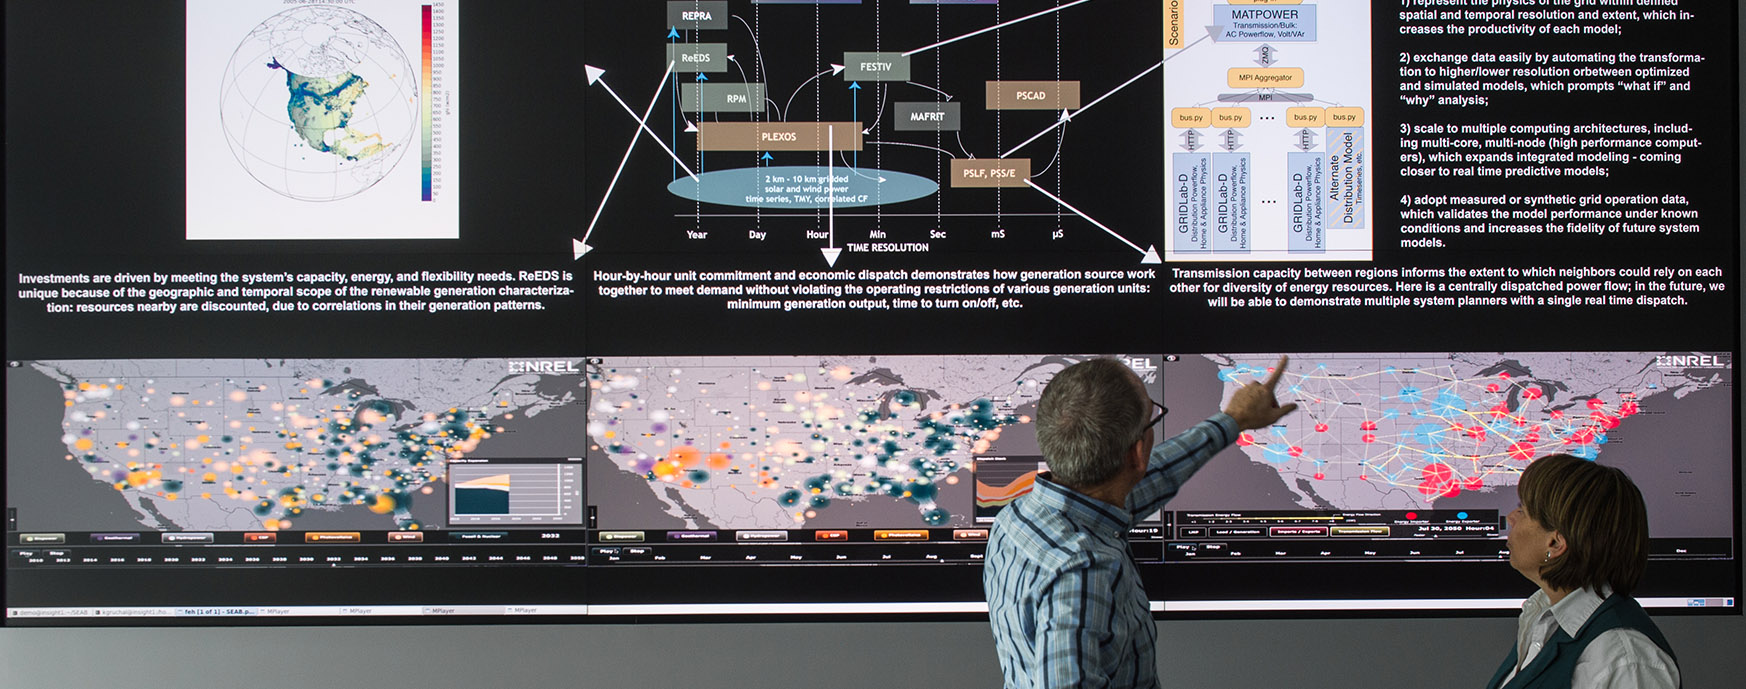 Photo of researchers inspecting maps on a large display.